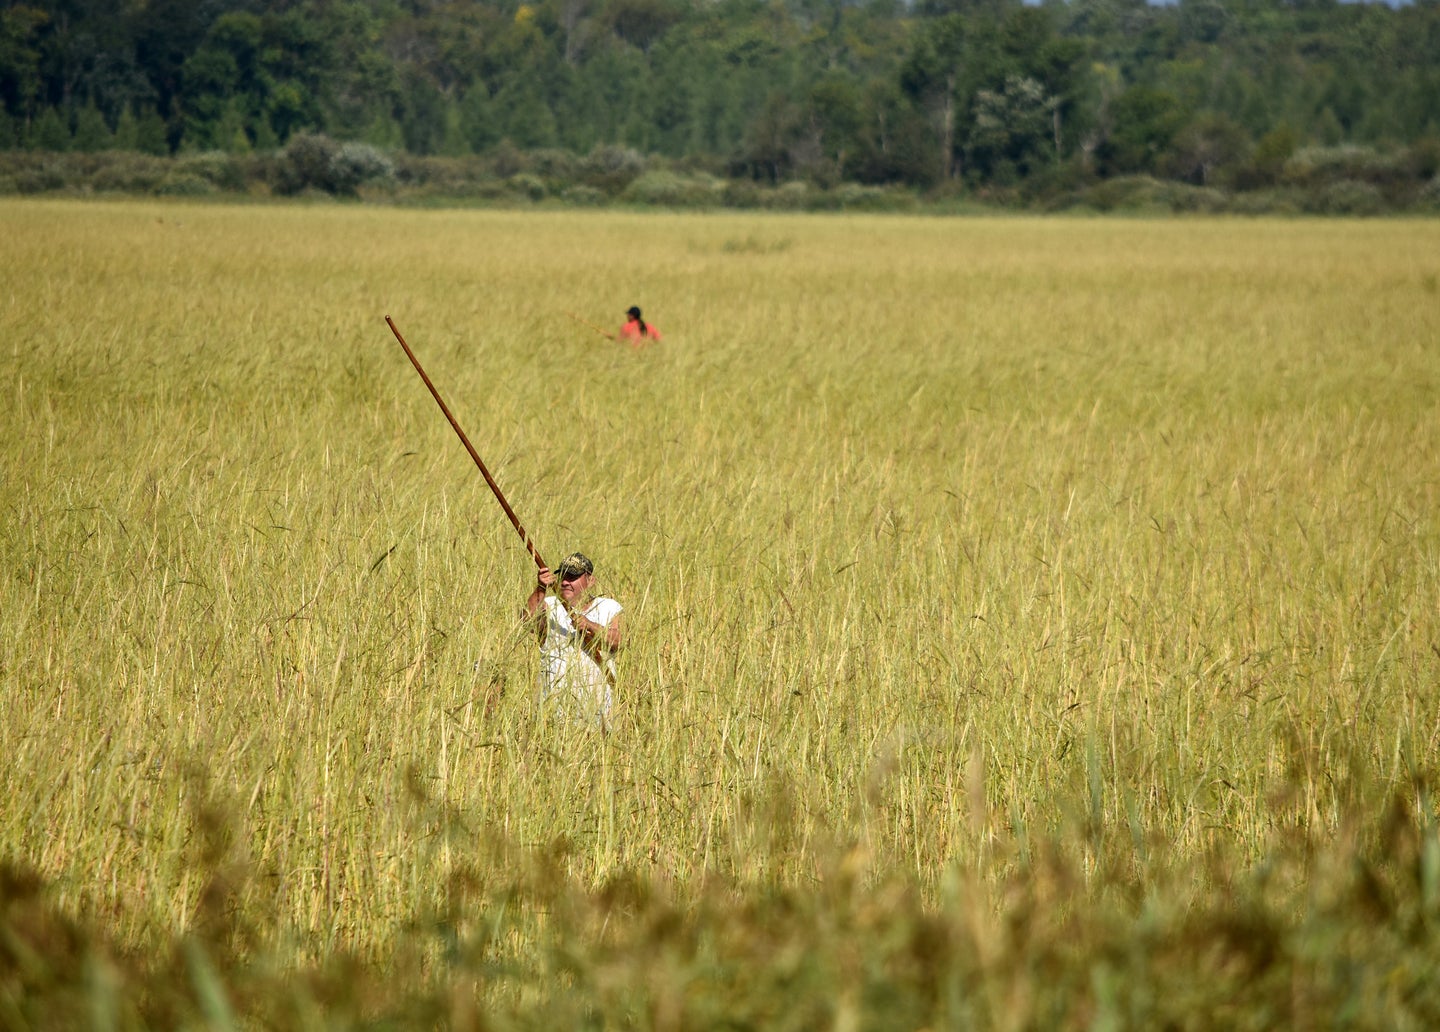 Minnesota has the largest amount of wild rice, one of North America's few native grains, by acre than any other state.